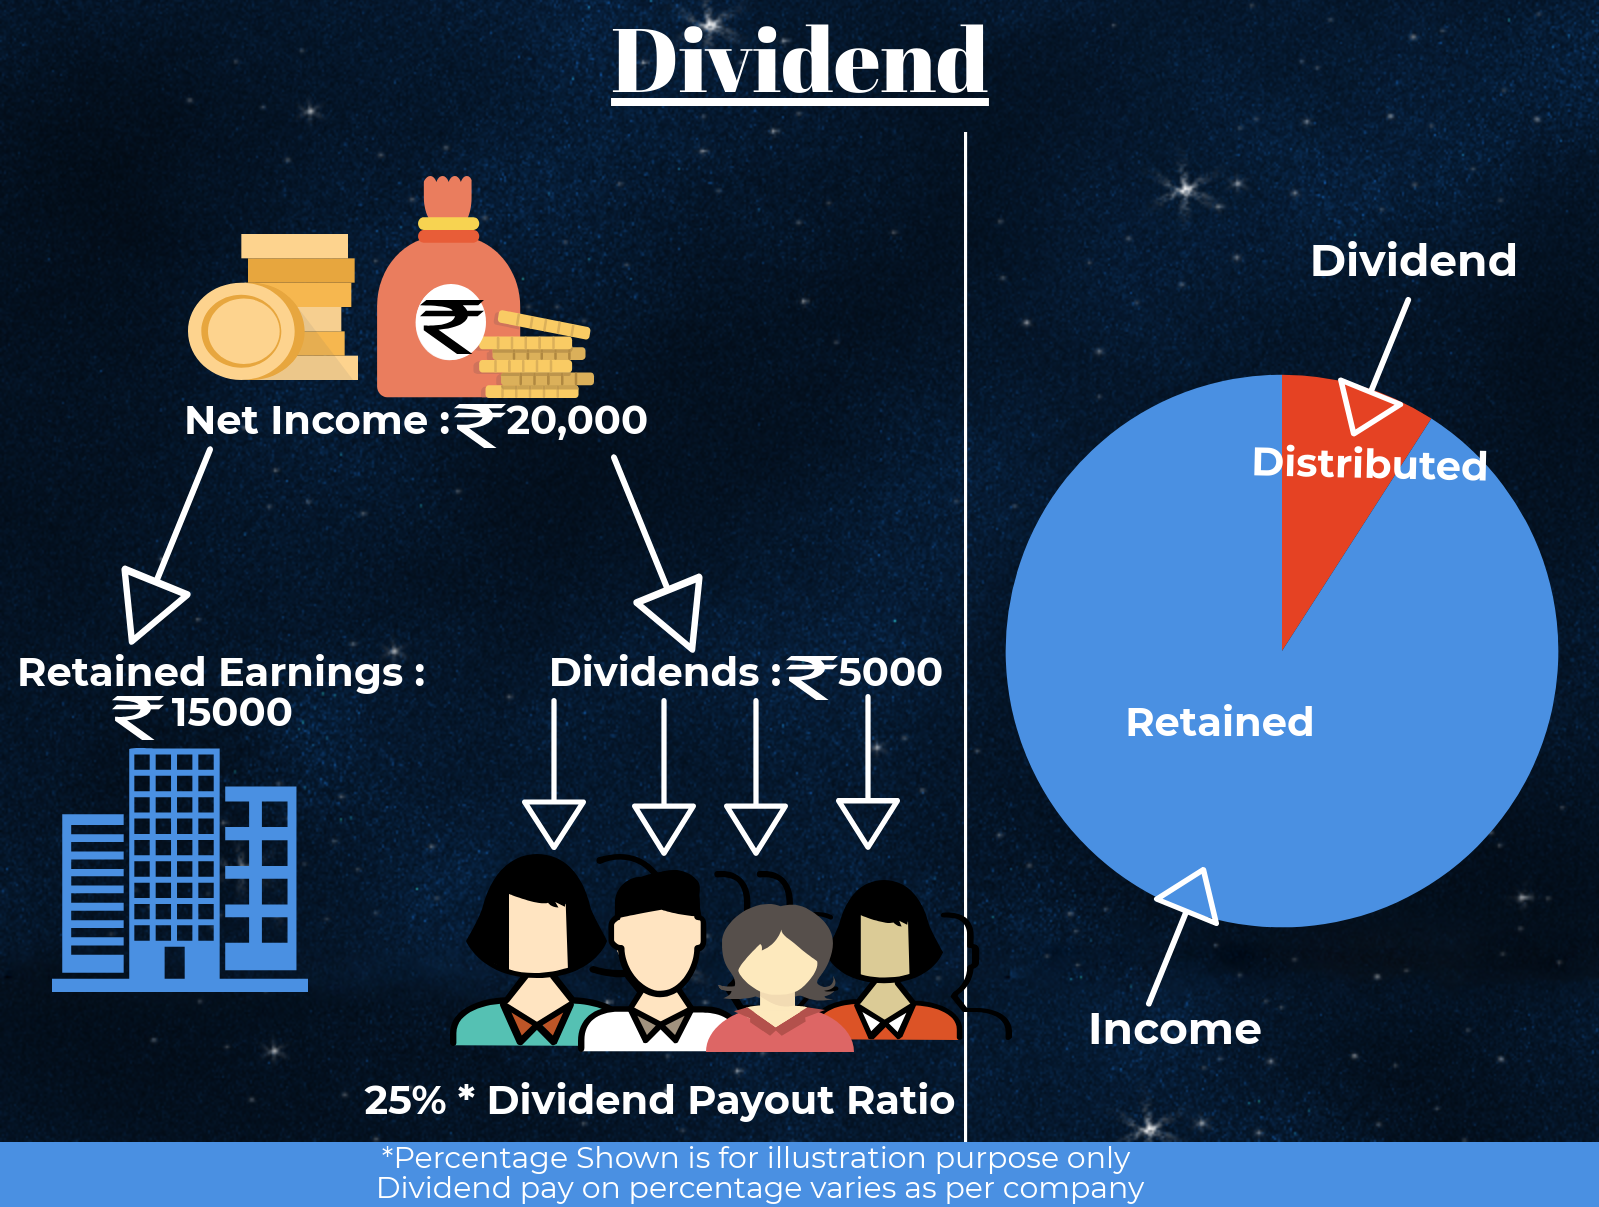 How Dividends Can Impact Stock